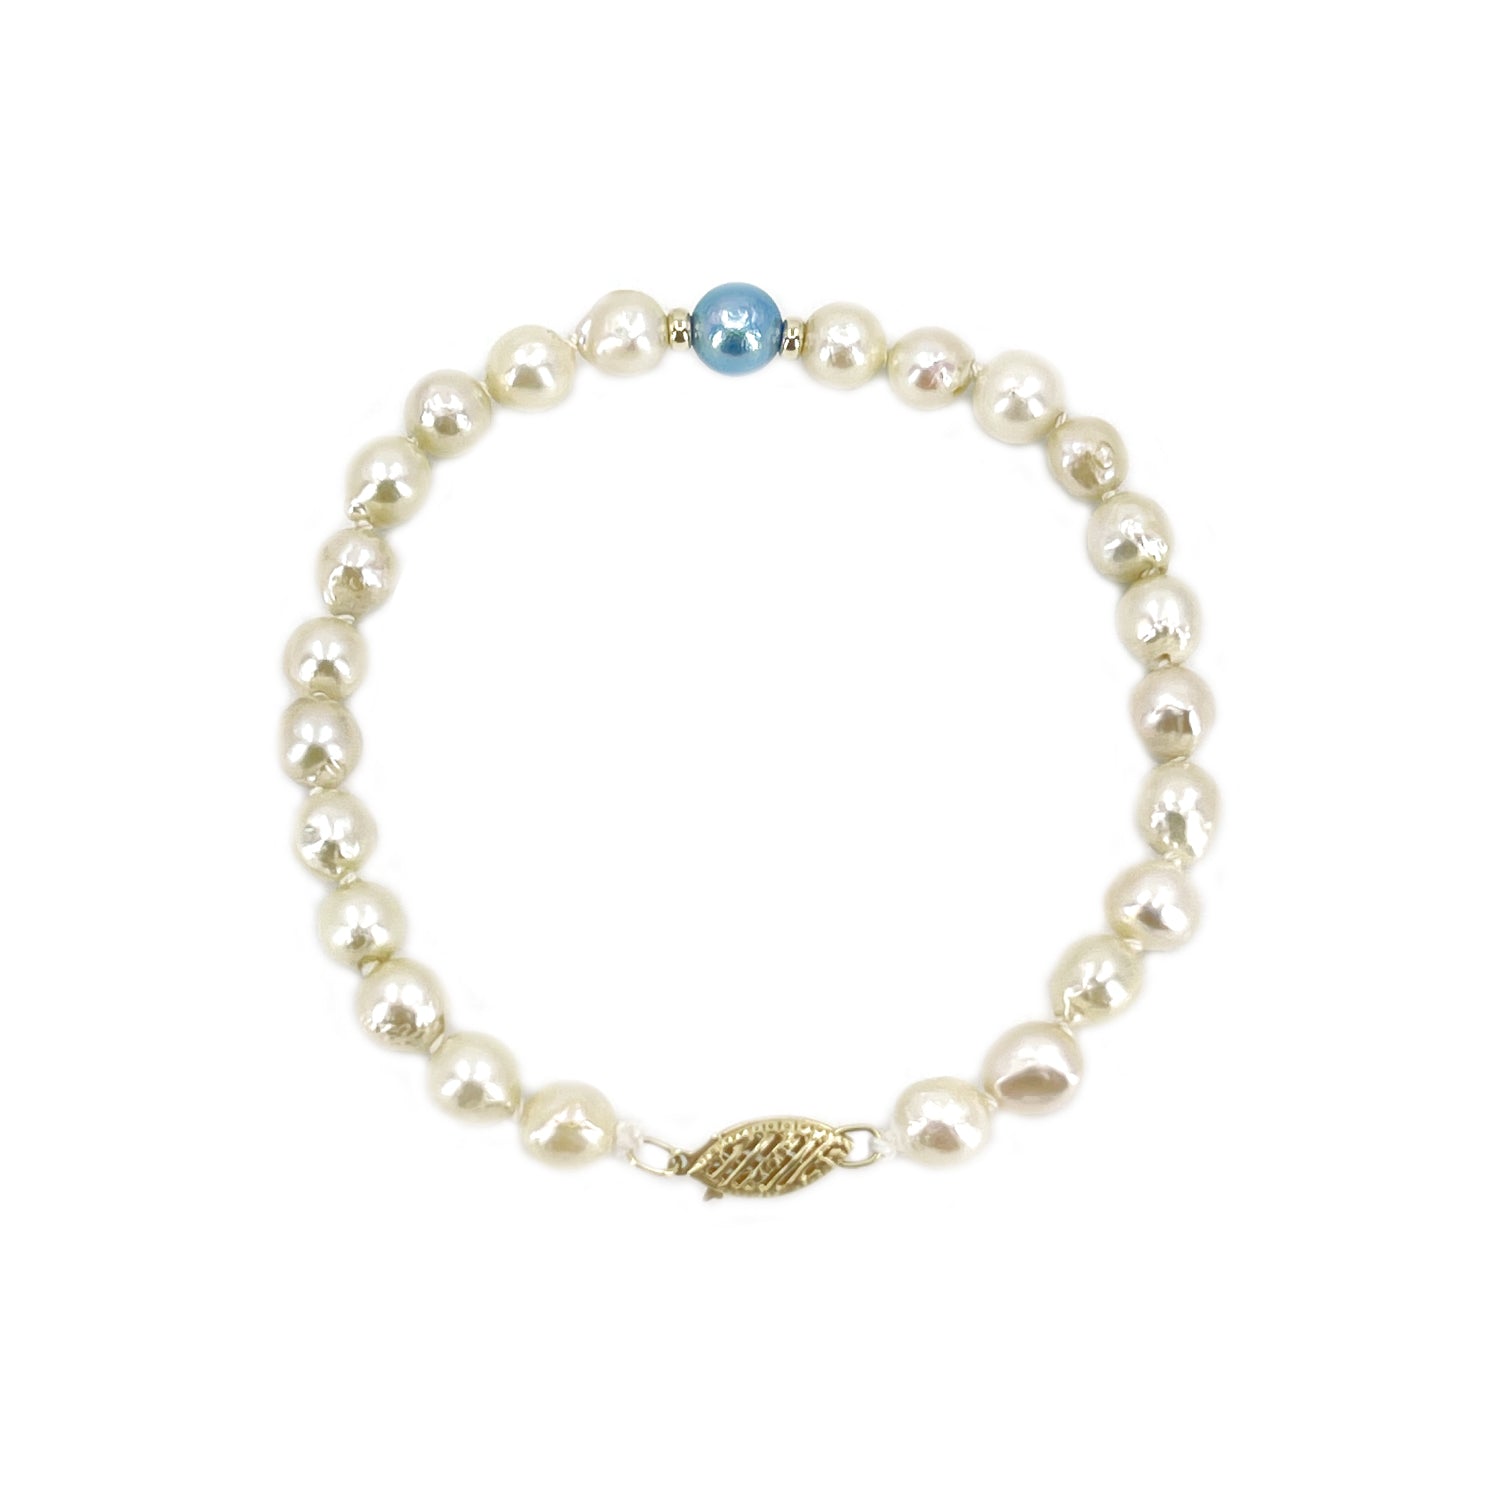 Two Tone Japanese White & Blue Saltwater Akoya Cultured Pearl Vintage Bracelet- 14K Yellow Gold